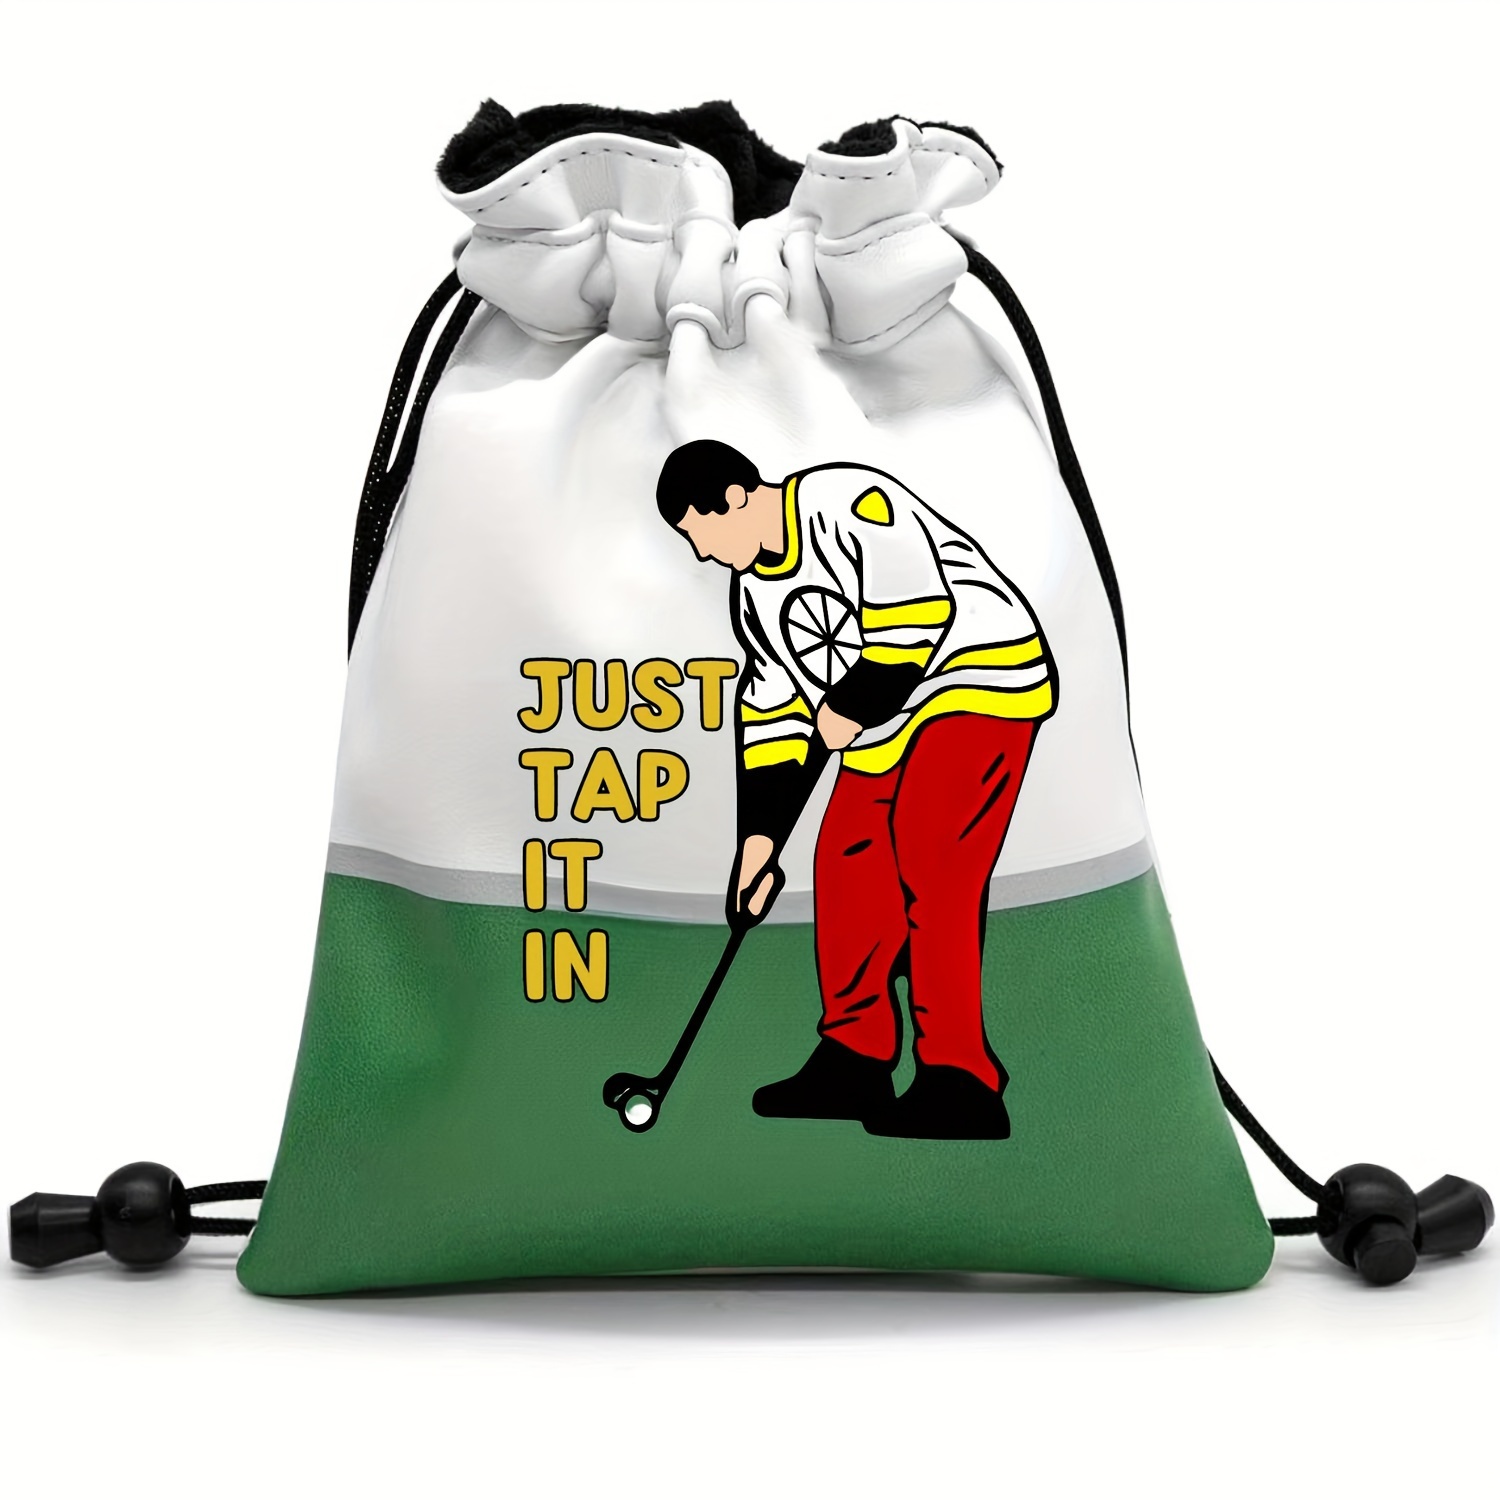 

Golf Valuables Pouch, Golf Pouch With Drawstrings, Golf Tee Bag For Men Women, Great Golf Gift For Dad And Golf Lovers